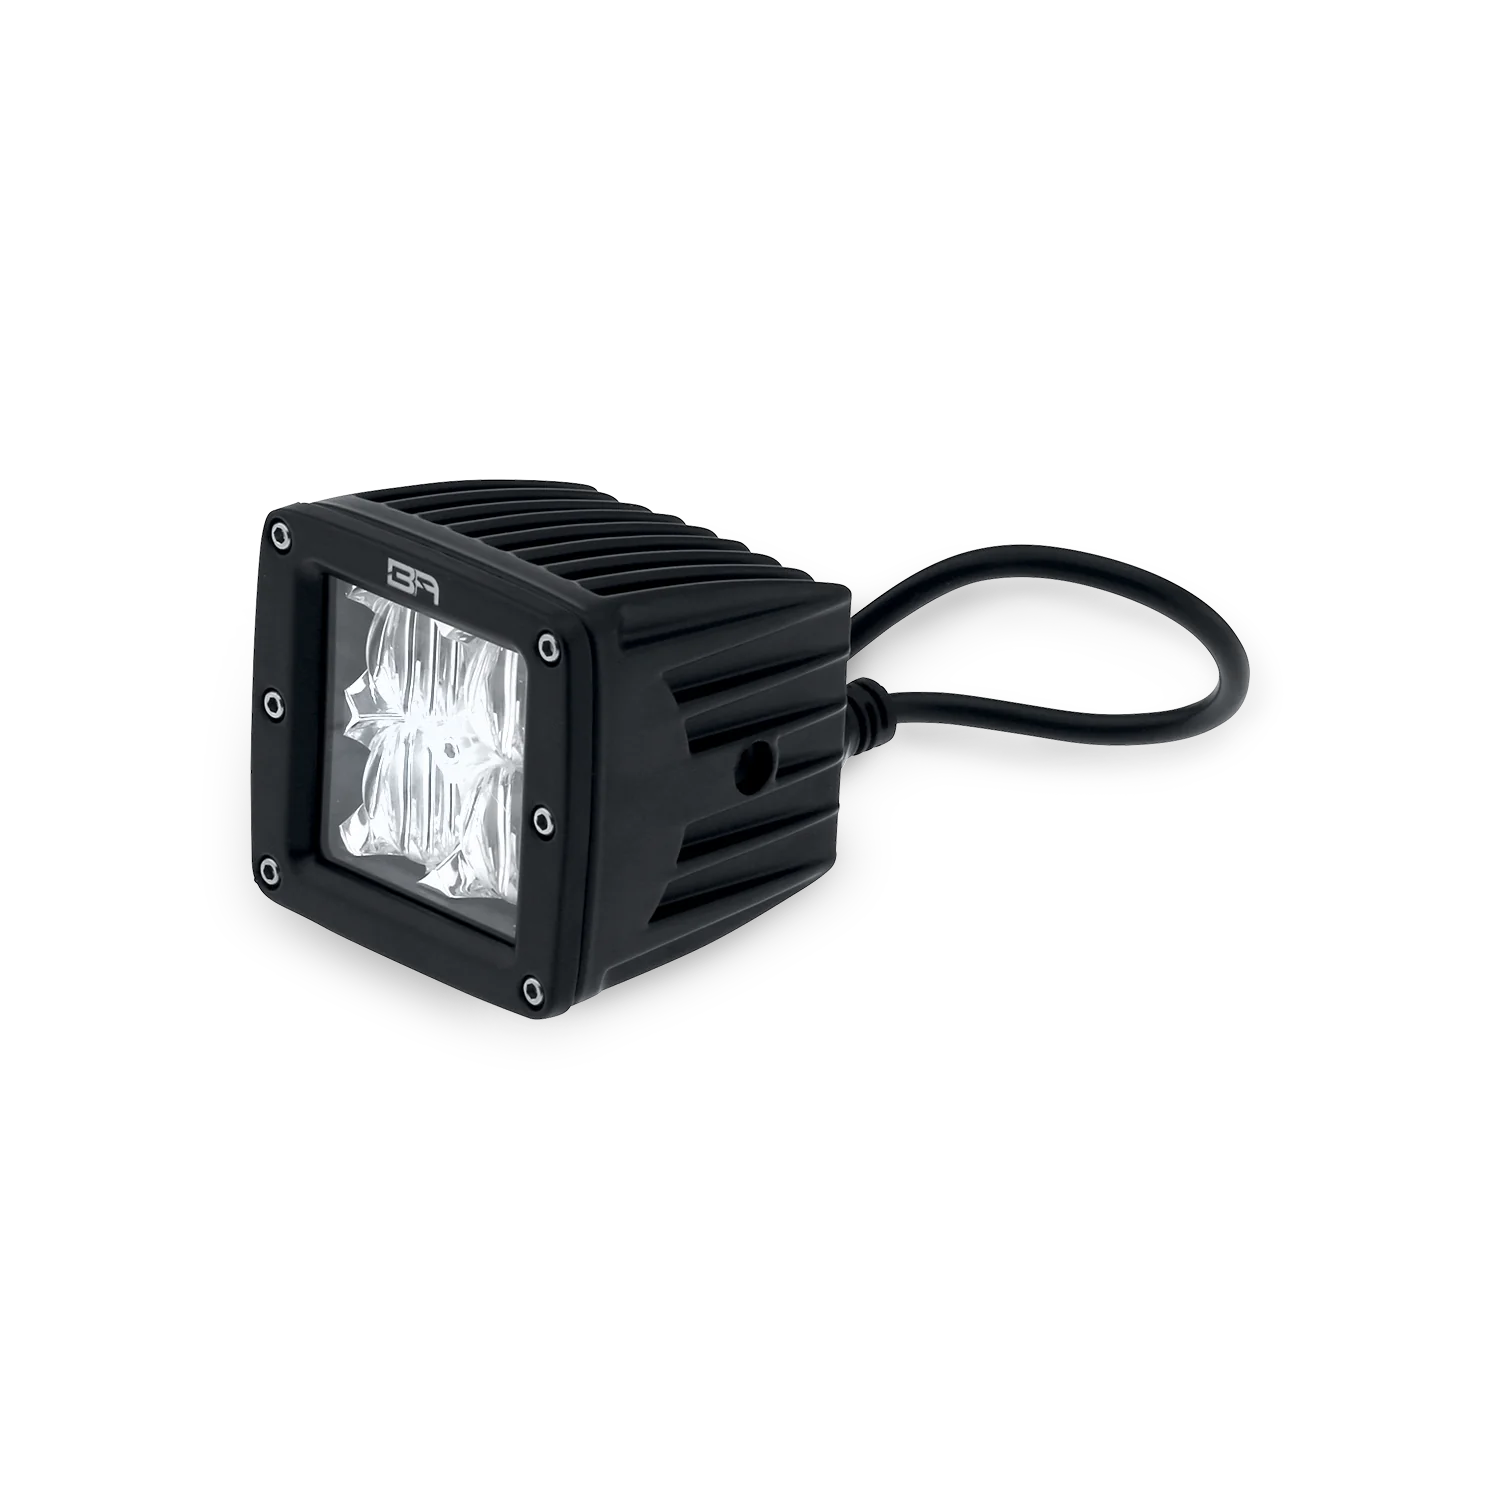 Body Armor 4x4 Cube LED Light Flood Pair with Wiring Harness